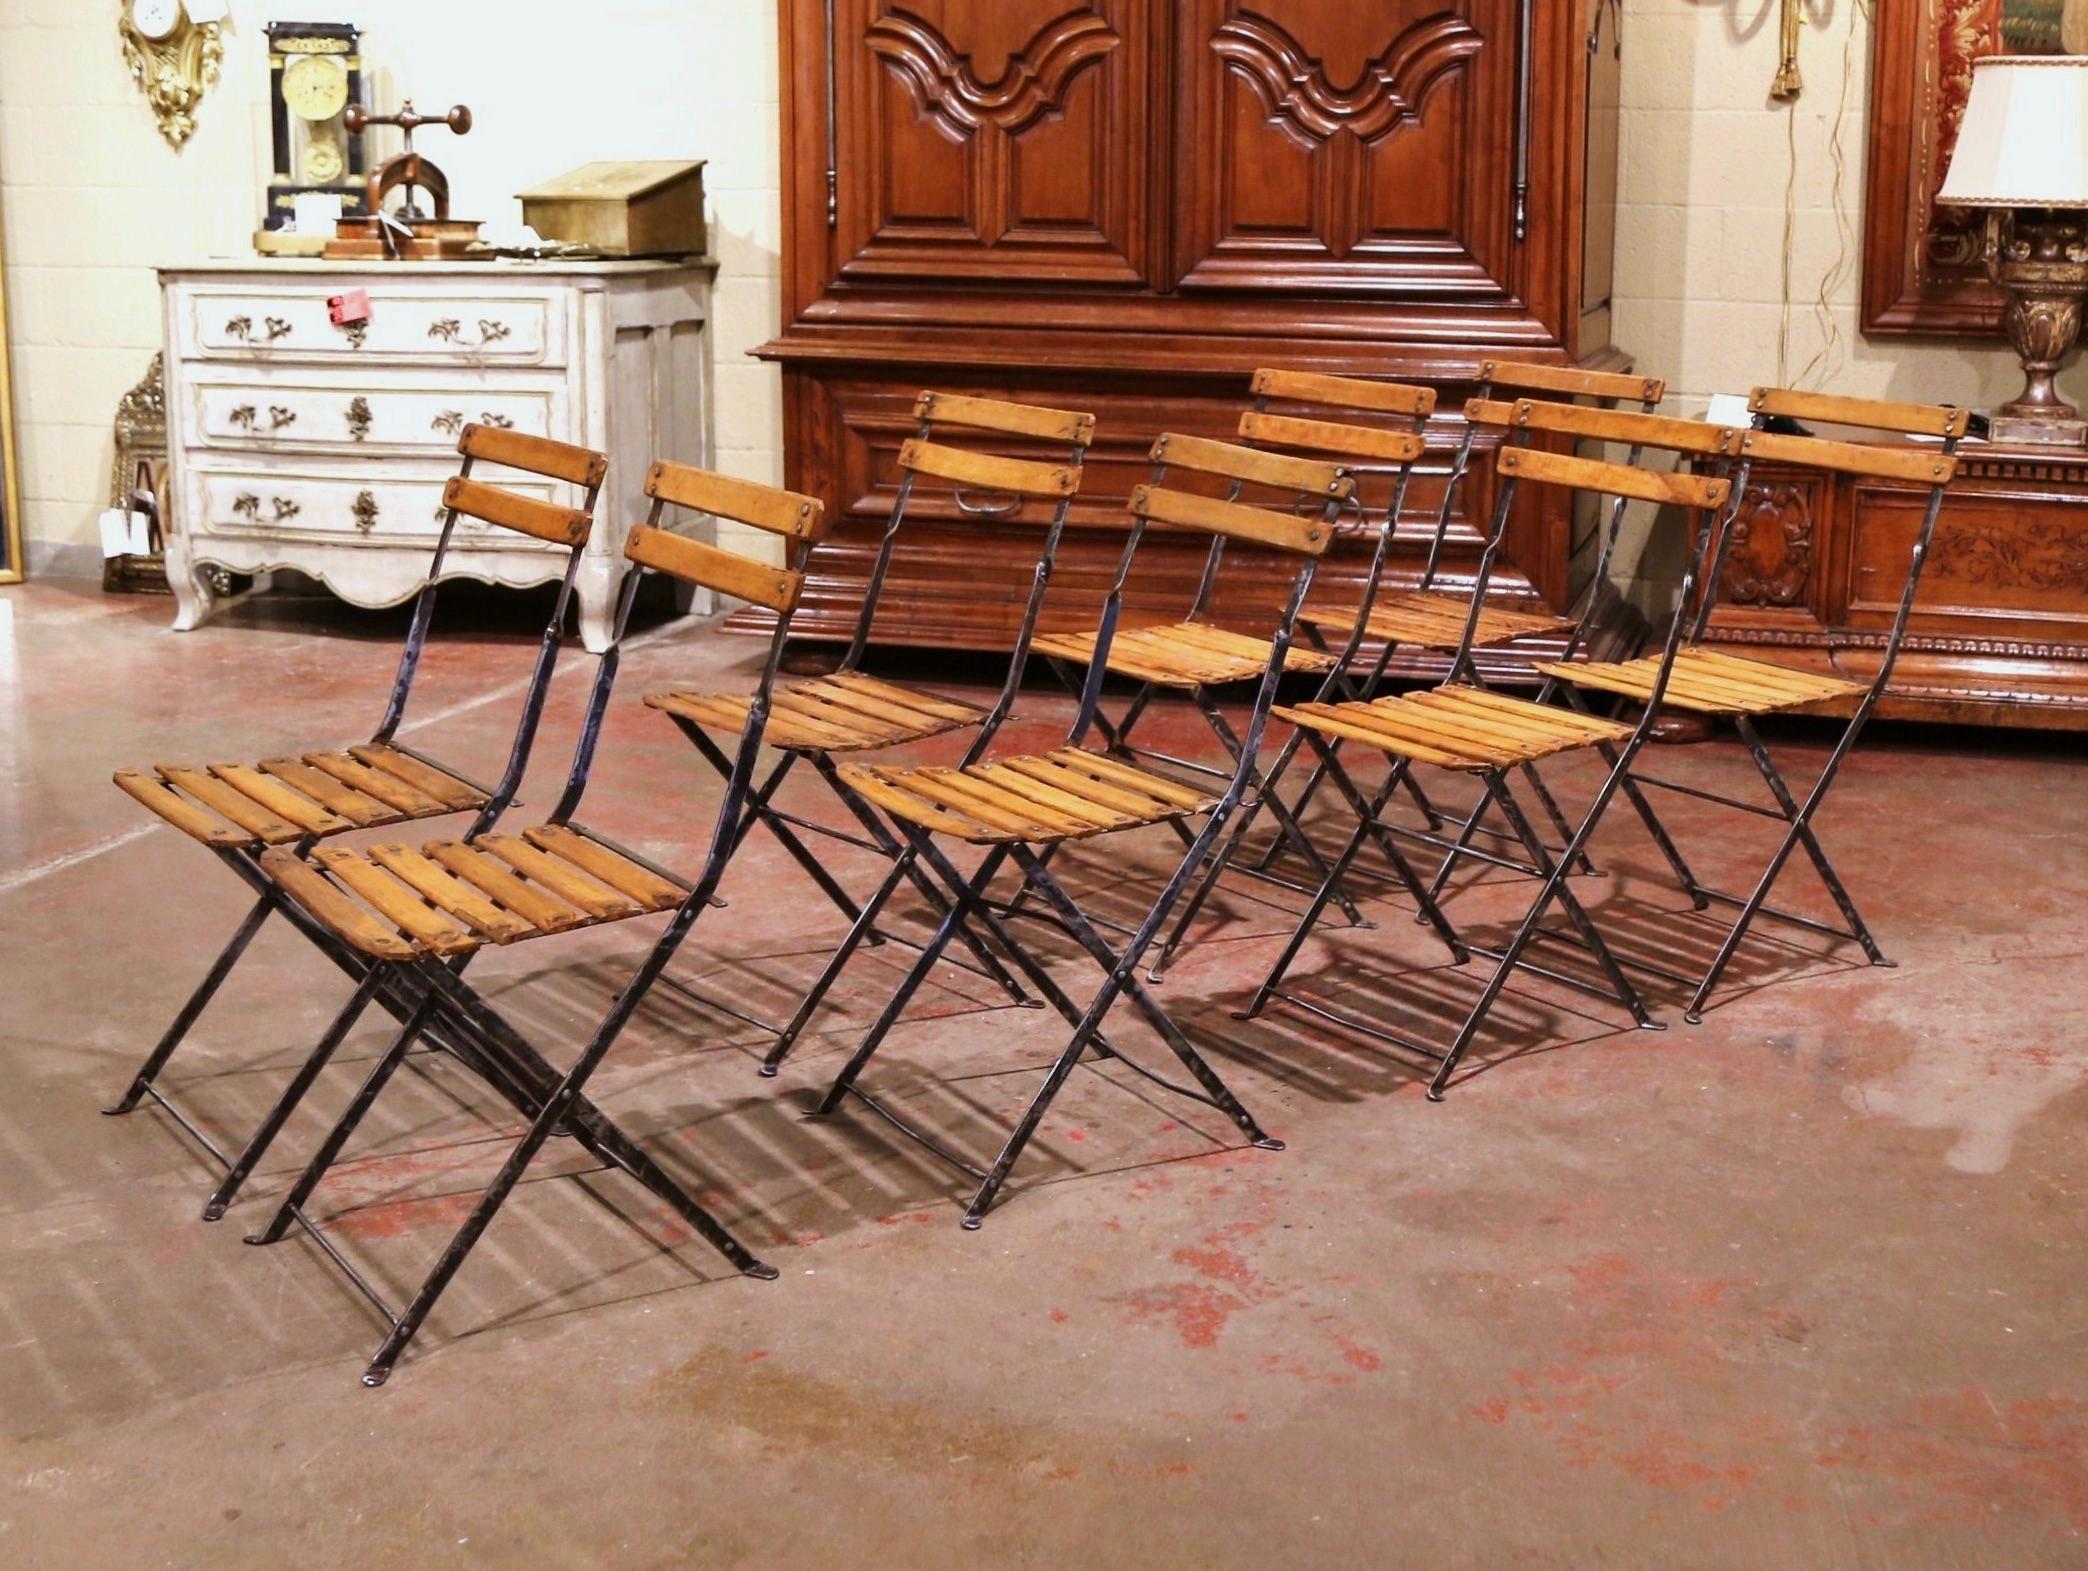 These antique chairs were crafted in Normandy, France, circa 1920. Made of iron and pine, each chair has a two-ladder back and six-slat seat, and features a folding mechanism for ultimate compact storage (less than 2